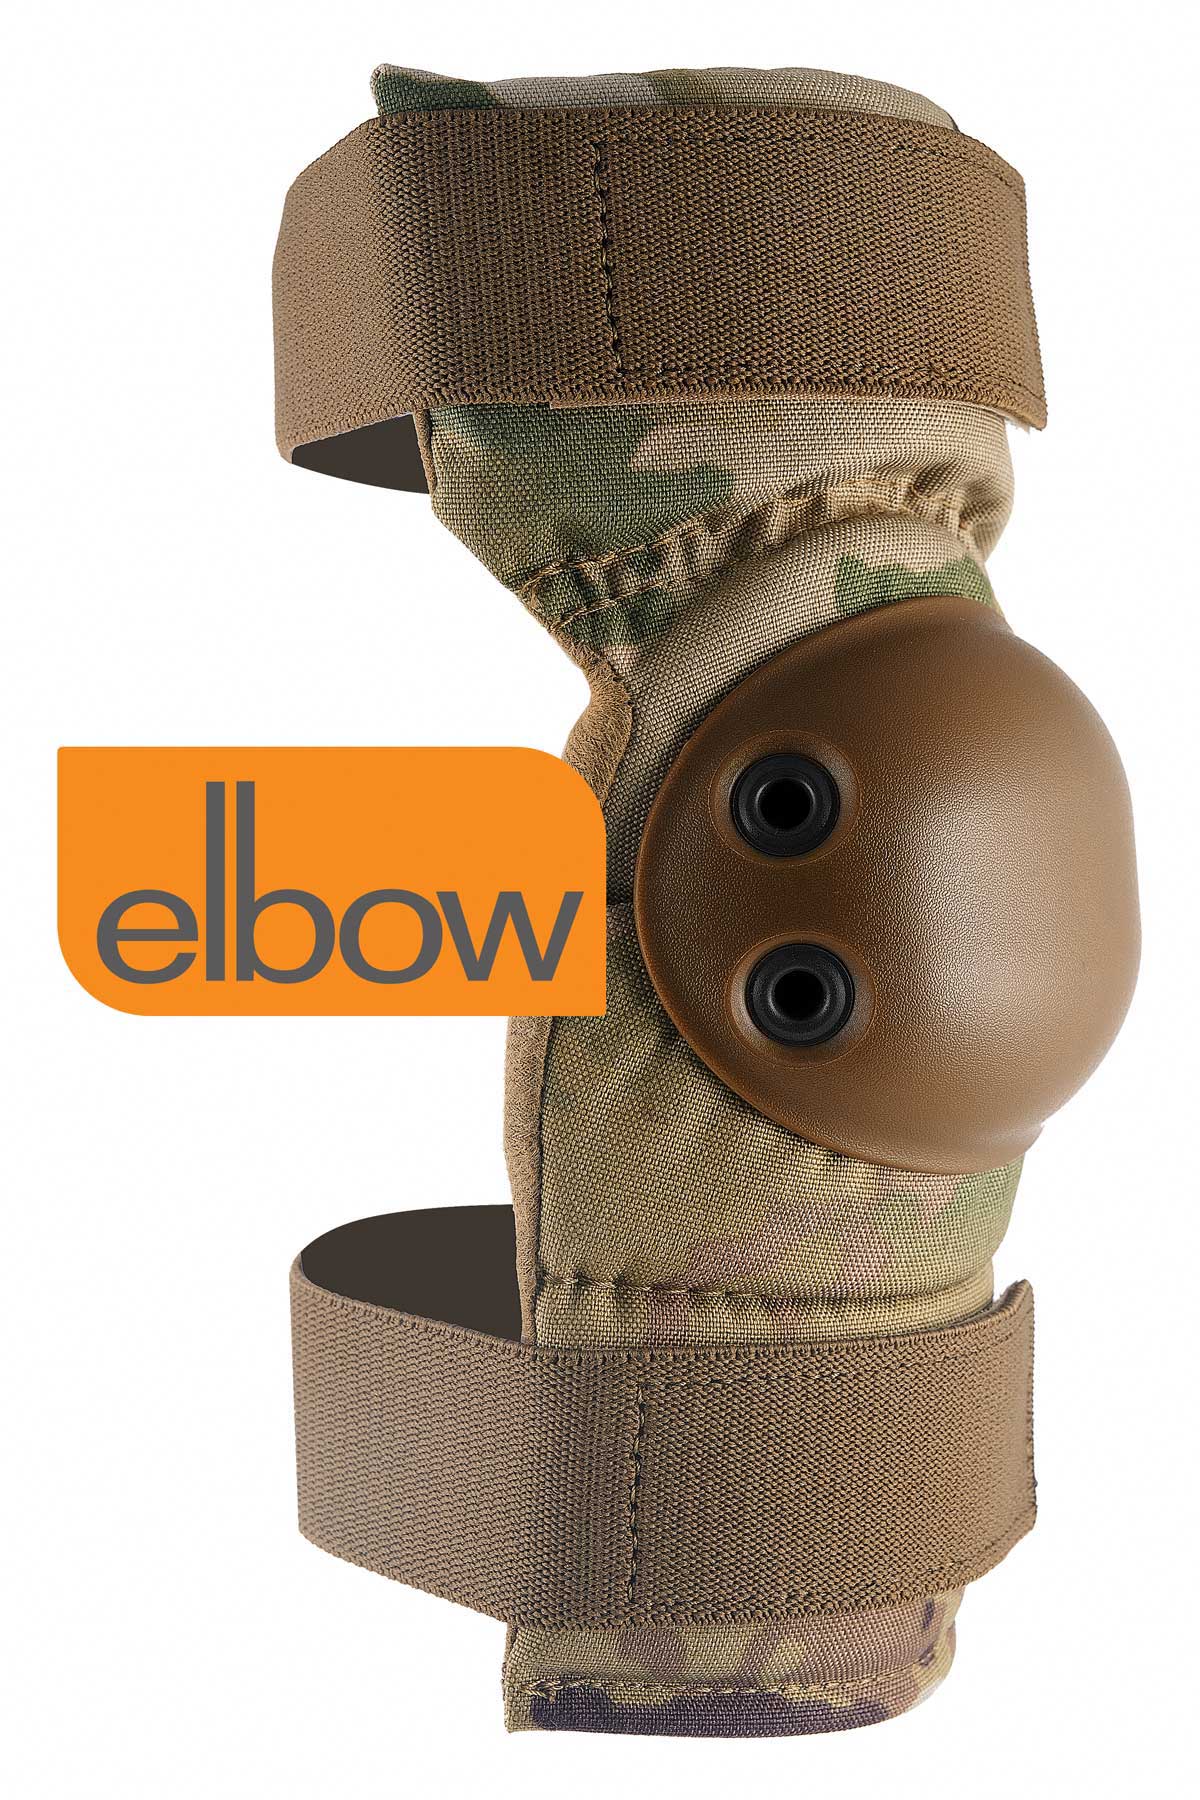 Copy of AltaCONTOUR Tactical Elbow Pad with O C P Scorpion